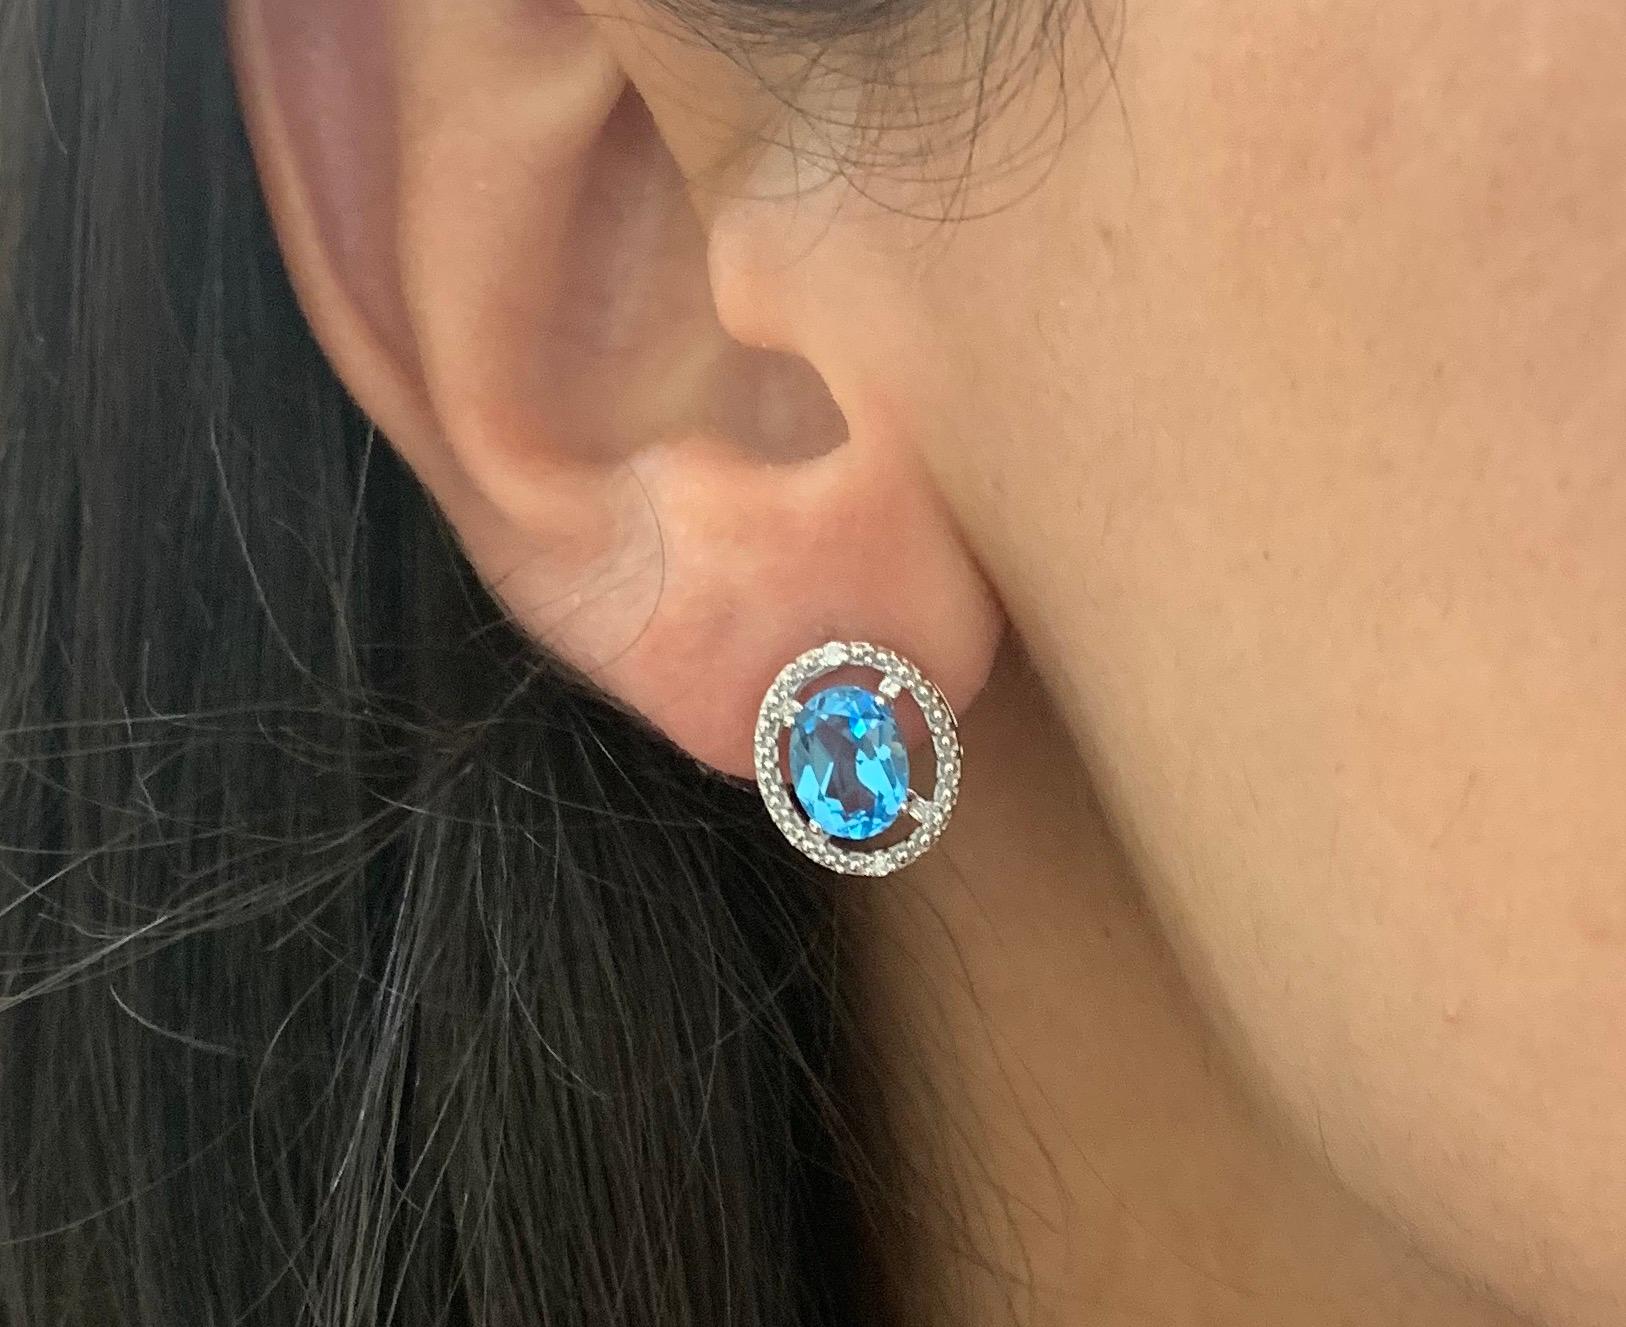 Material: 14k White Gold
Stone Details: 2 Oval Shaped Blue Topaz at 3.28 Carats Total- Measuring 8 x 6 mm
Diamond Details: 4 Brilliant Round White Diamonds at 0.02 Carats - Clarity: SI / Color H-I

Fine one-of-a-kind craftsmanship meets incredible